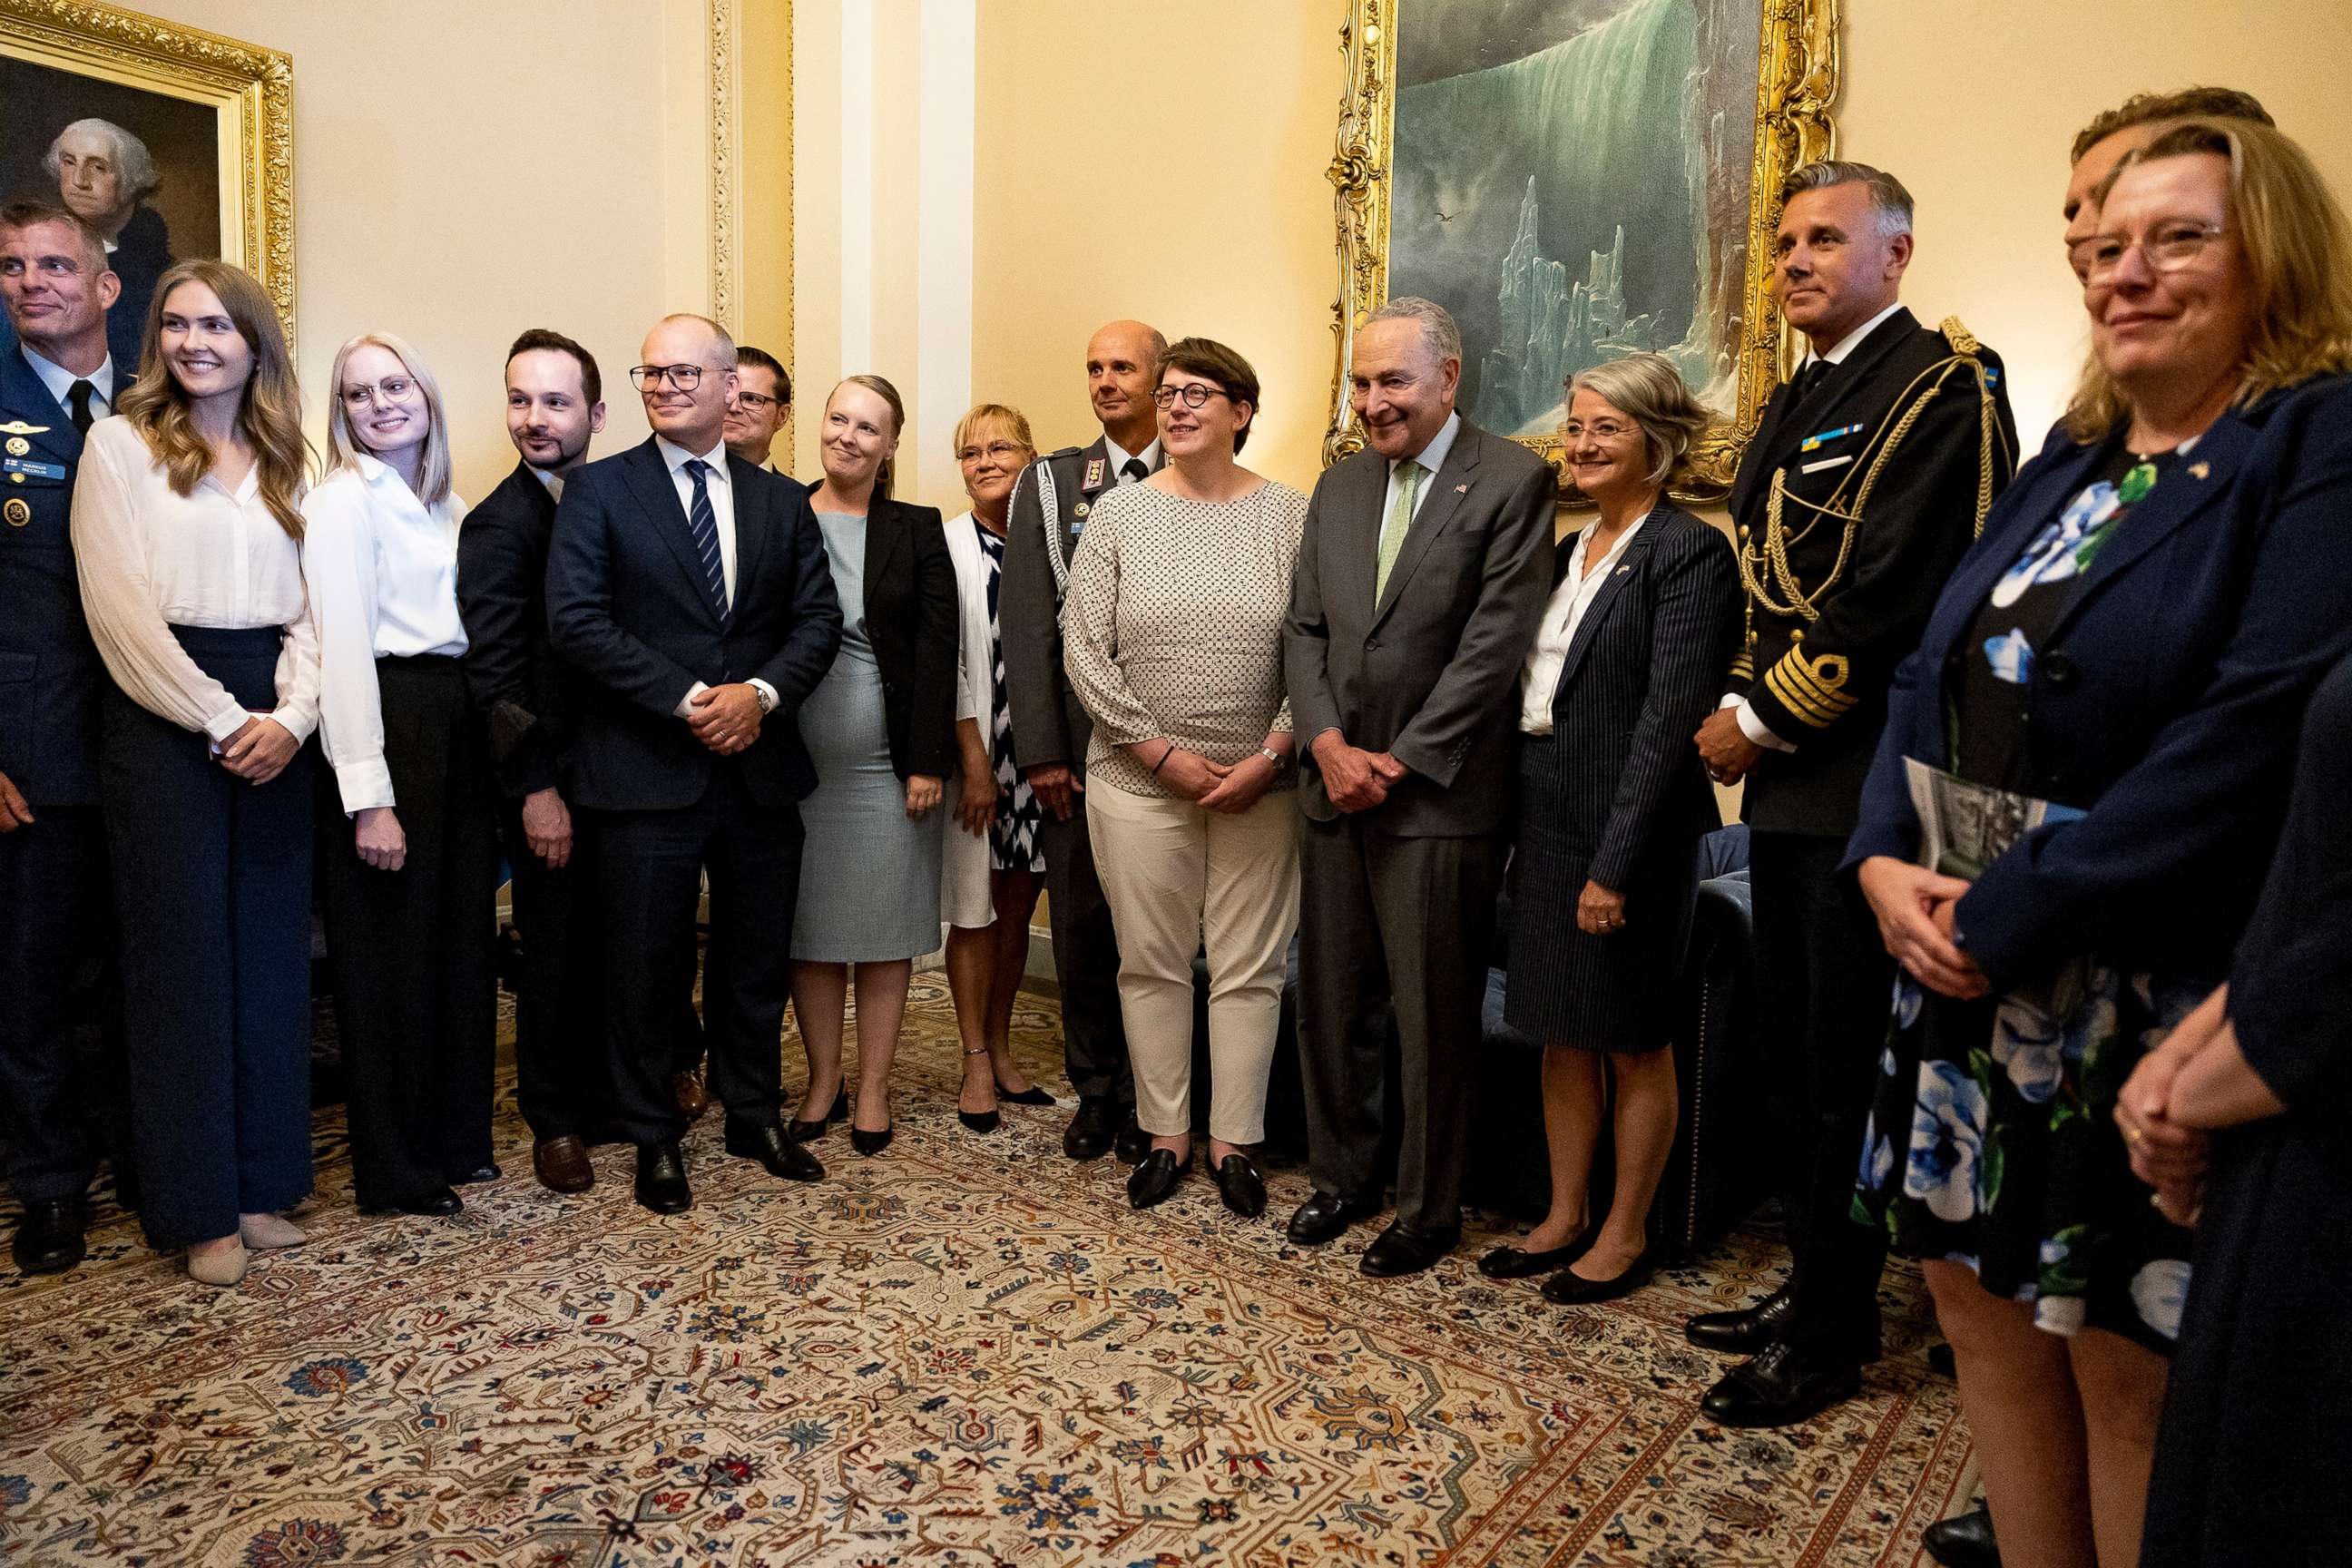 PHOTO: Senate Majority Leader Chuck Schumer poses for a photo with an official delegation from Finland and Sweden in his office in Washington, Aug. 3, 2022.